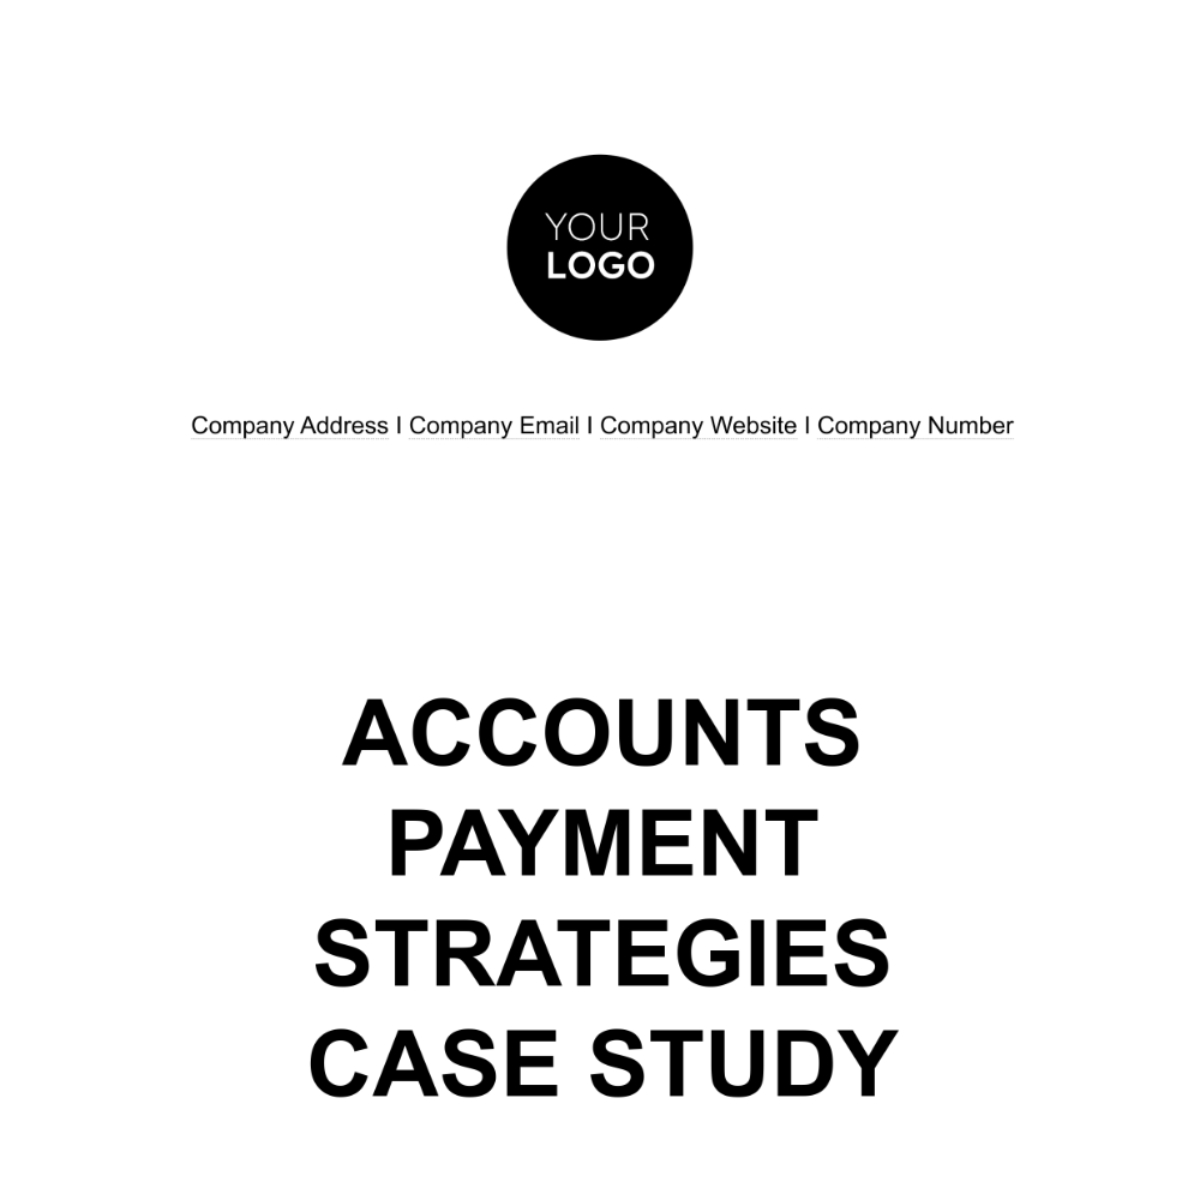 Accounts Payment Strategies Case Study Template